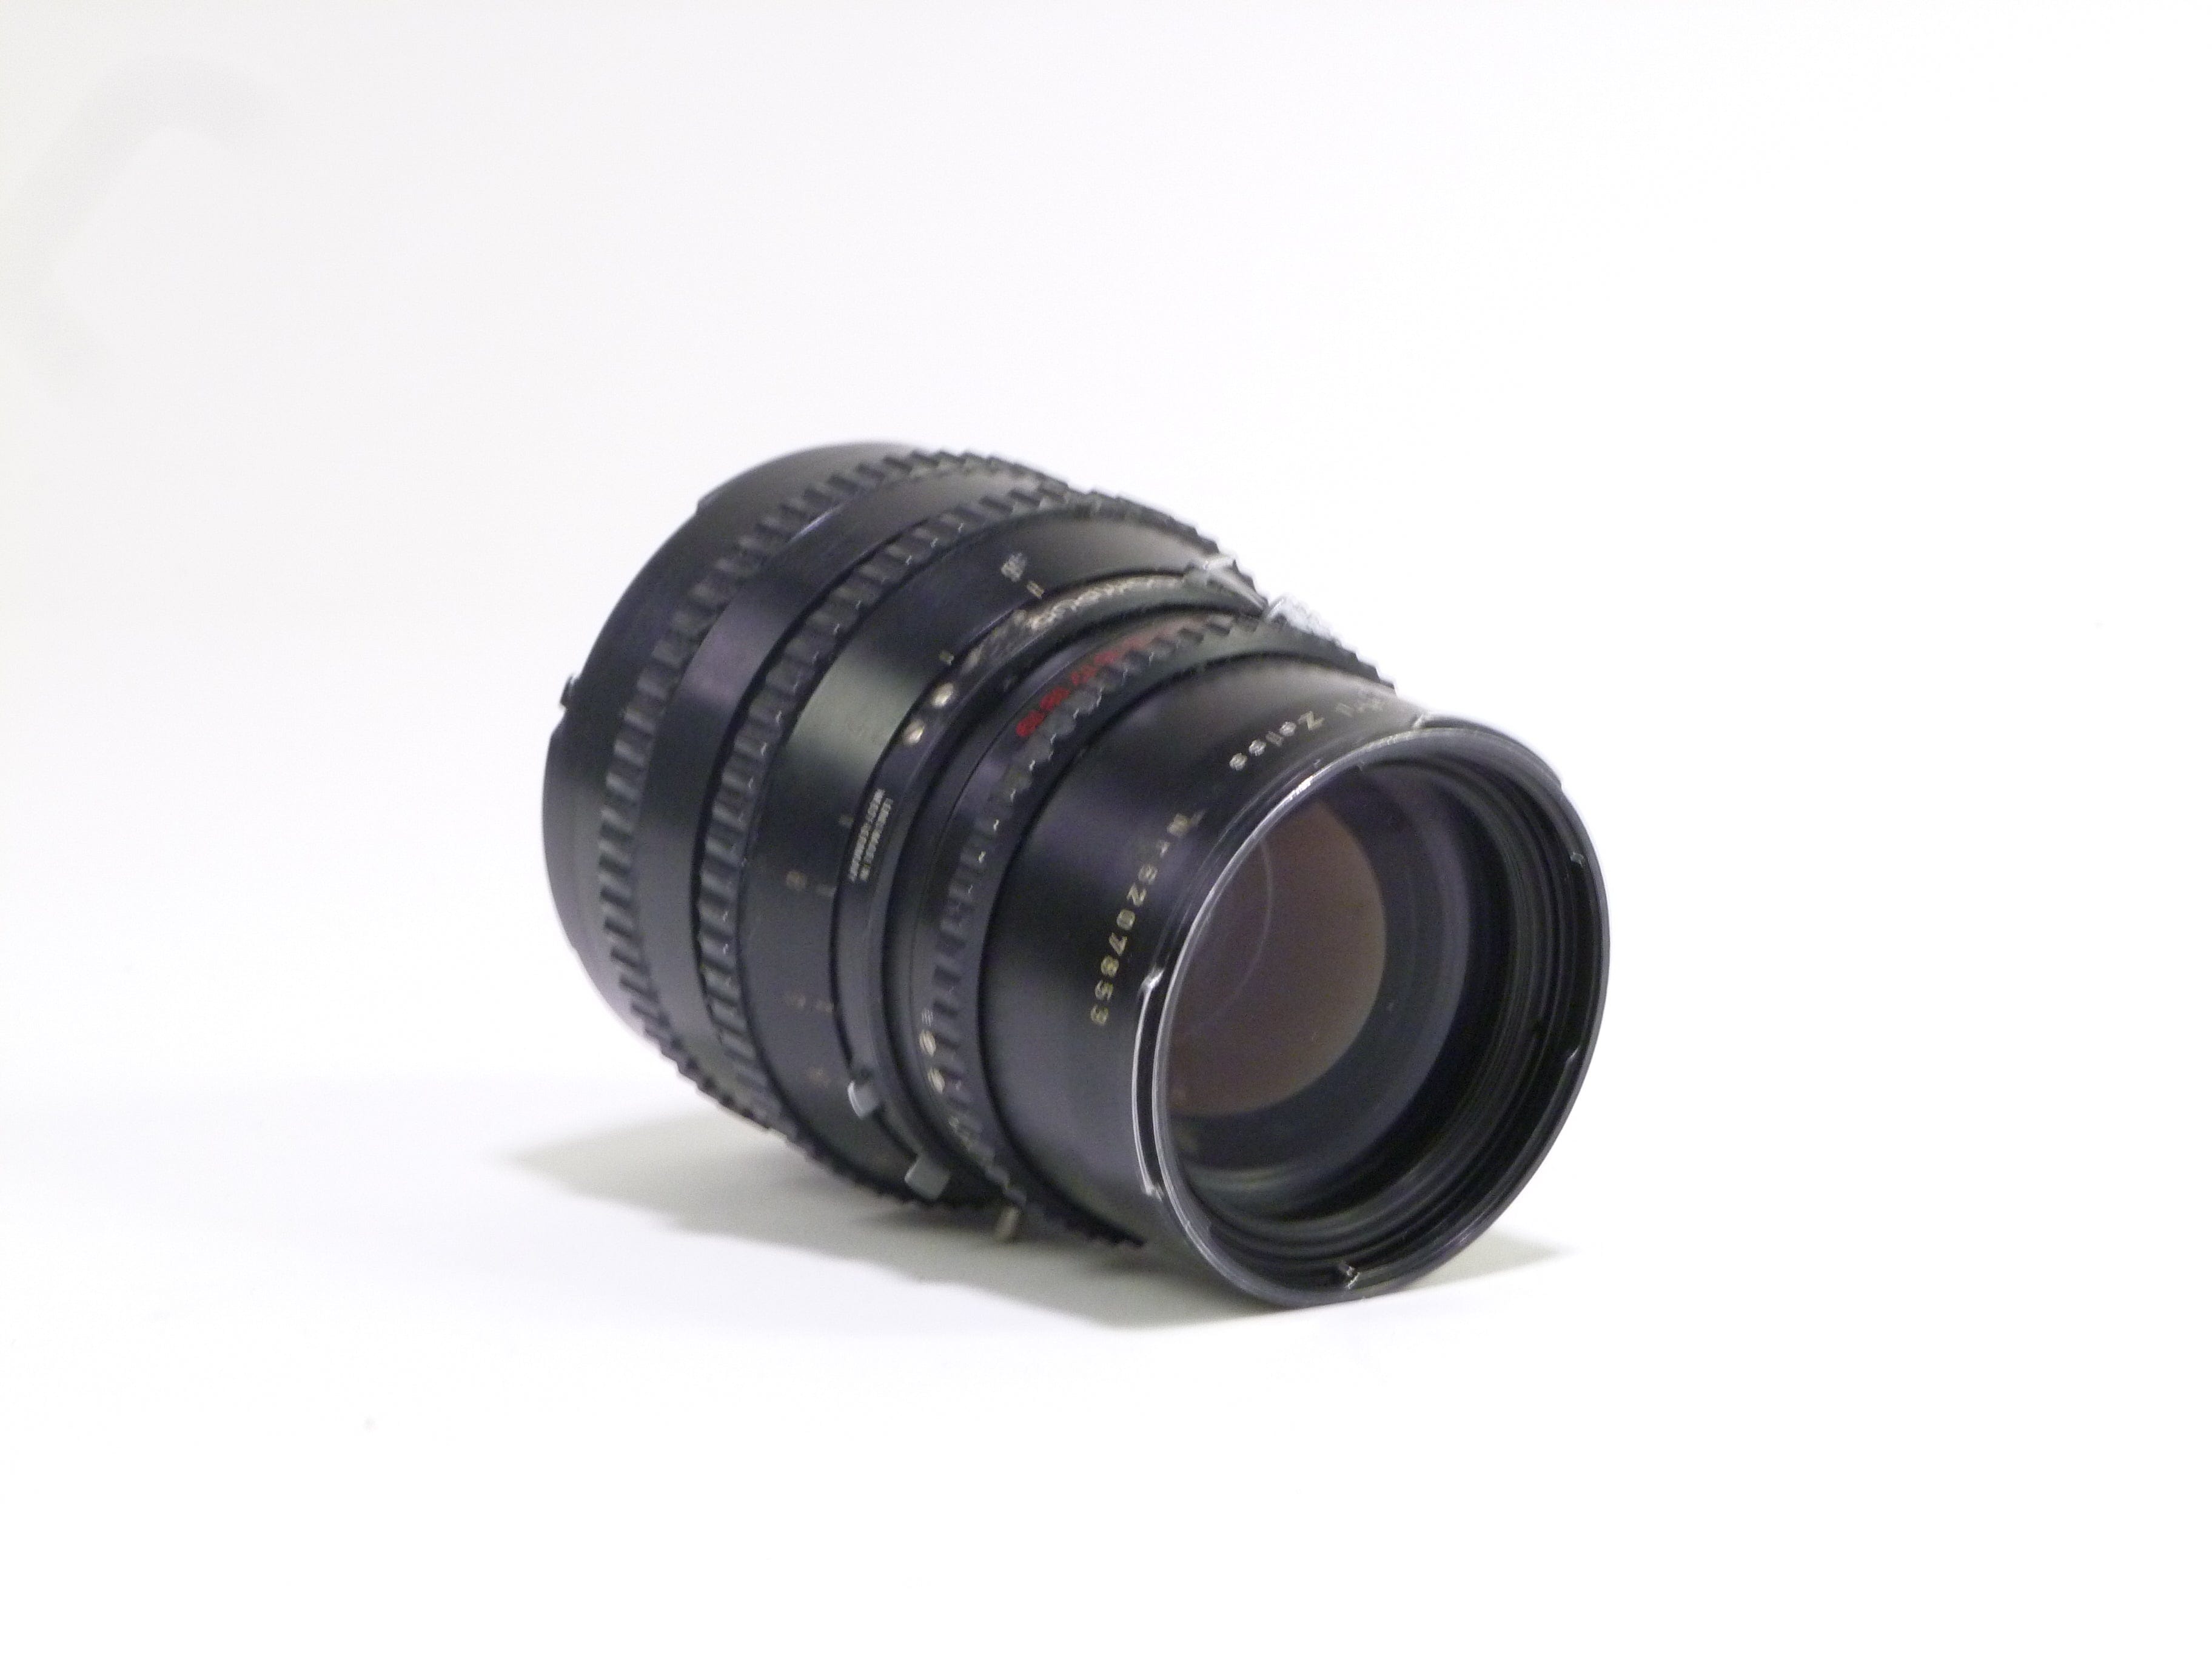 Carl Zeiss Sonnar 150mm F4 T* for Hasselblad V - Just CLA'd